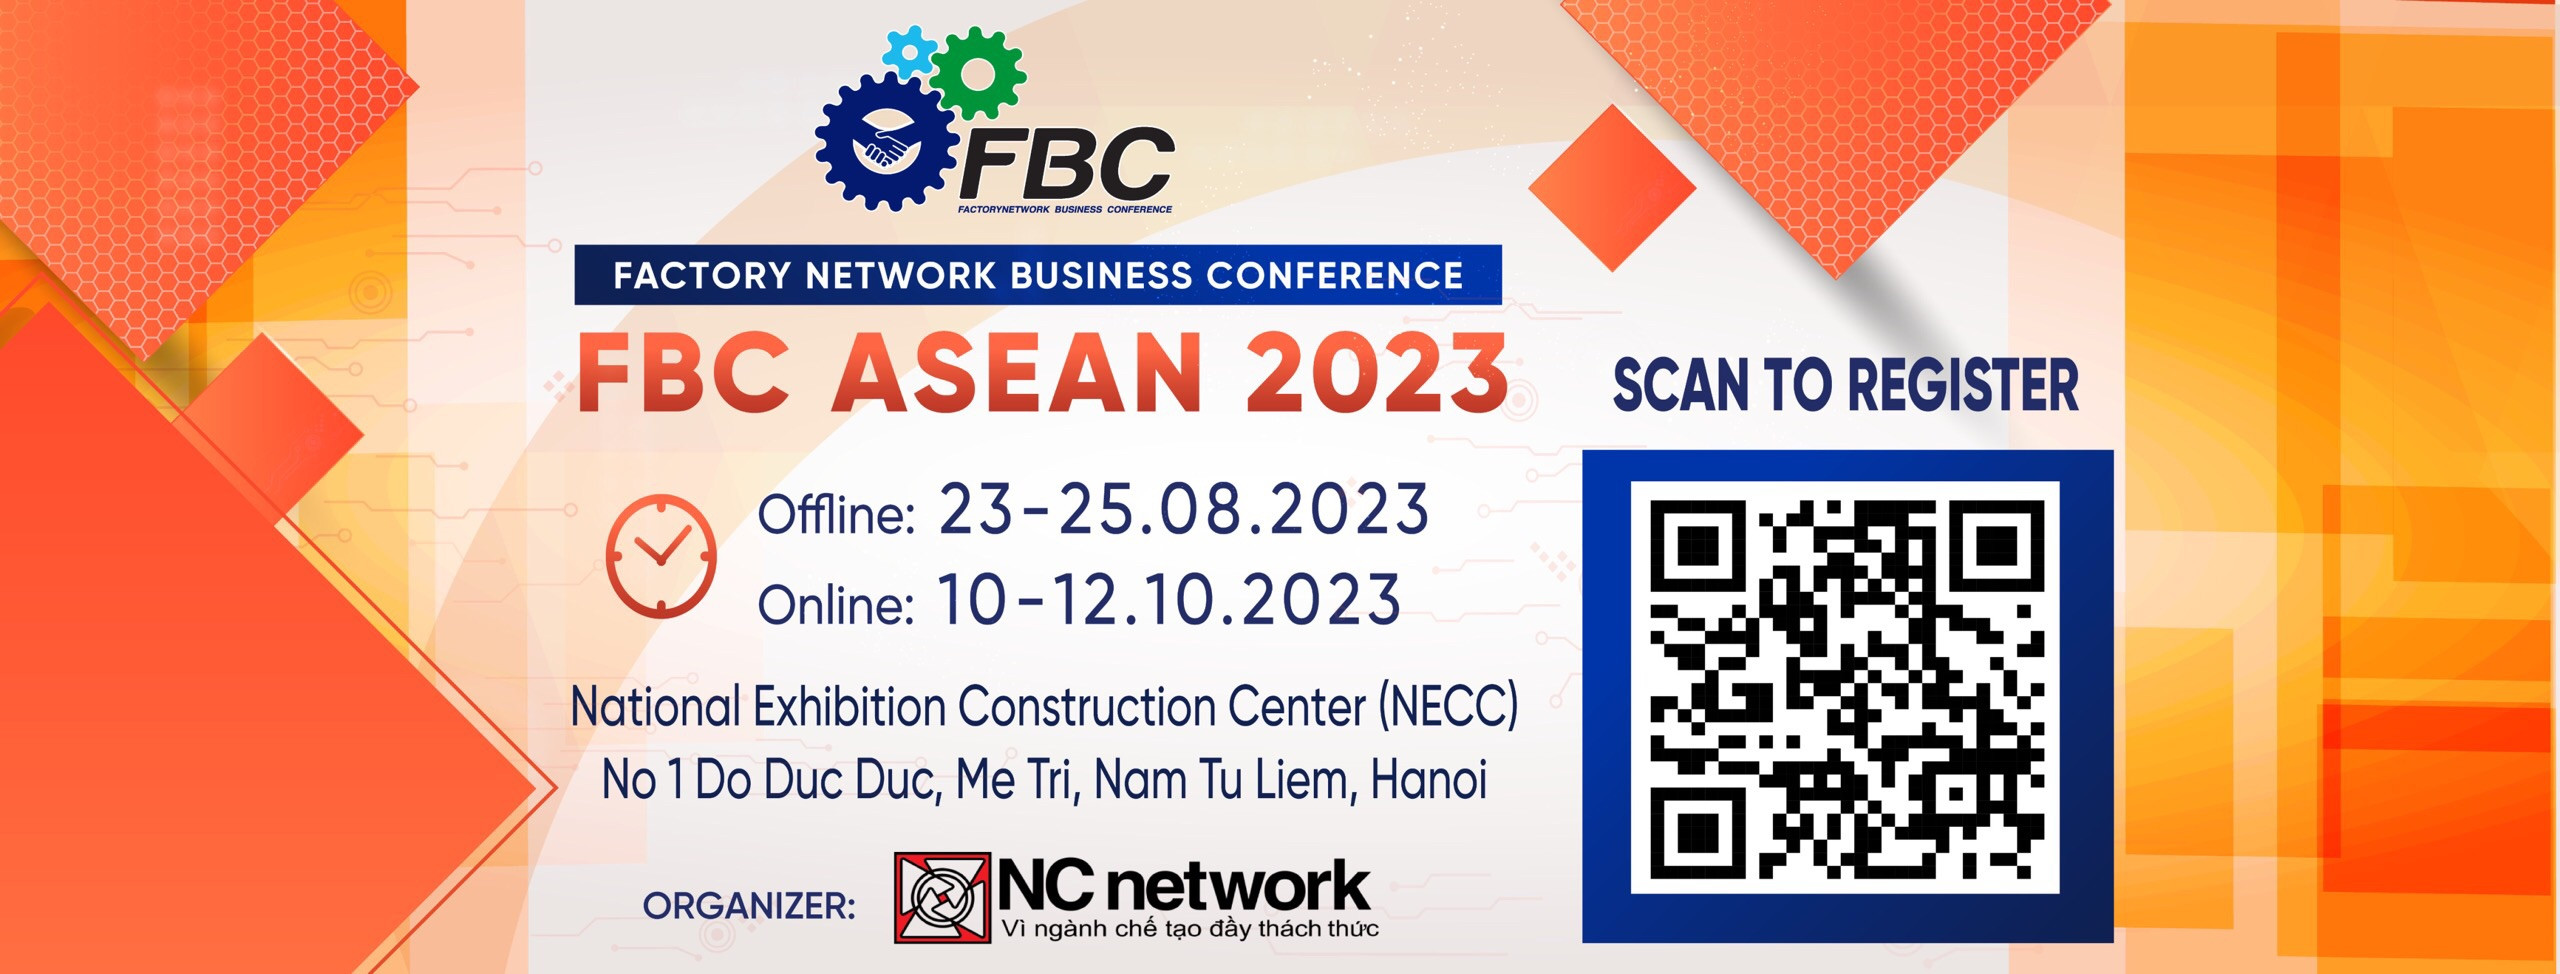 Factory Network Business Conference ASEAN 2023 - Exhibitors List (10)